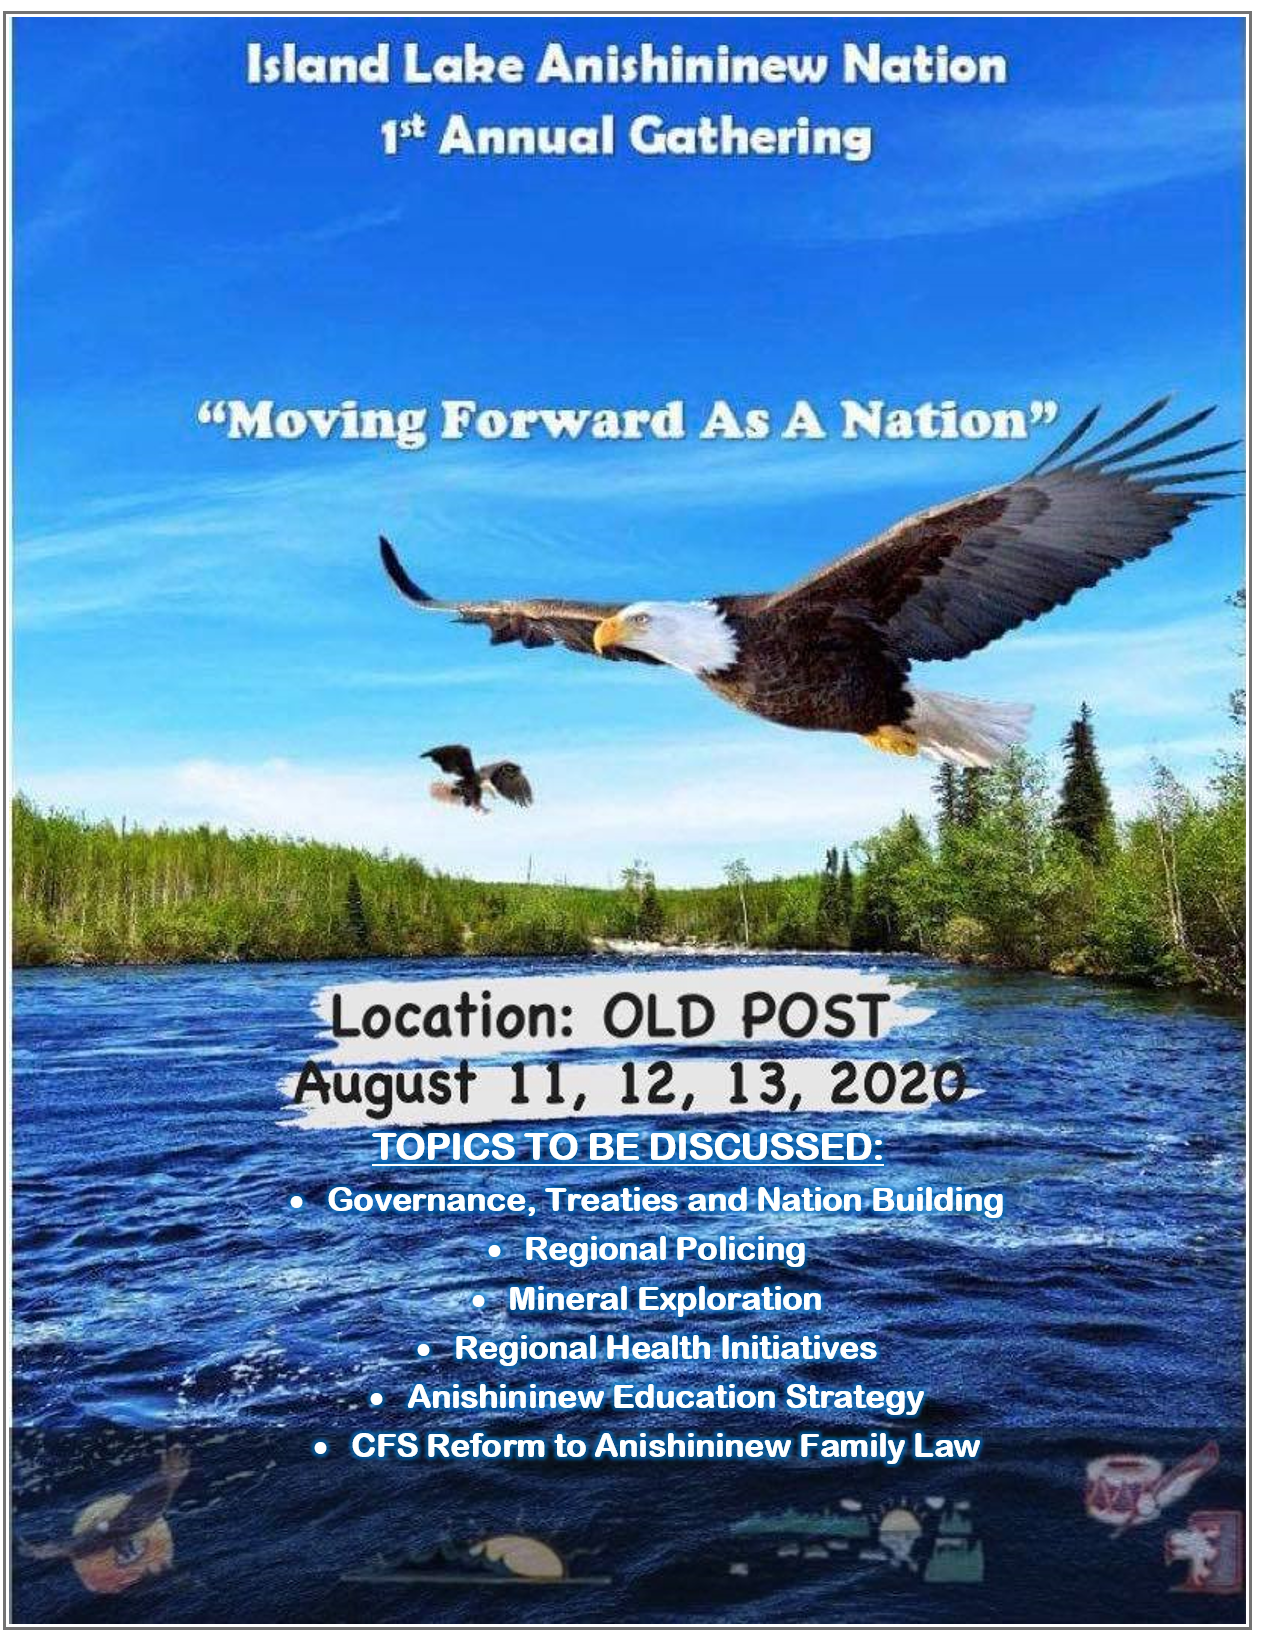 You are currently viewing Island Lake Anishininew Nation 1st Annual Gathering “Moving Forward as A Nation” August 11, 12, 13, 2020